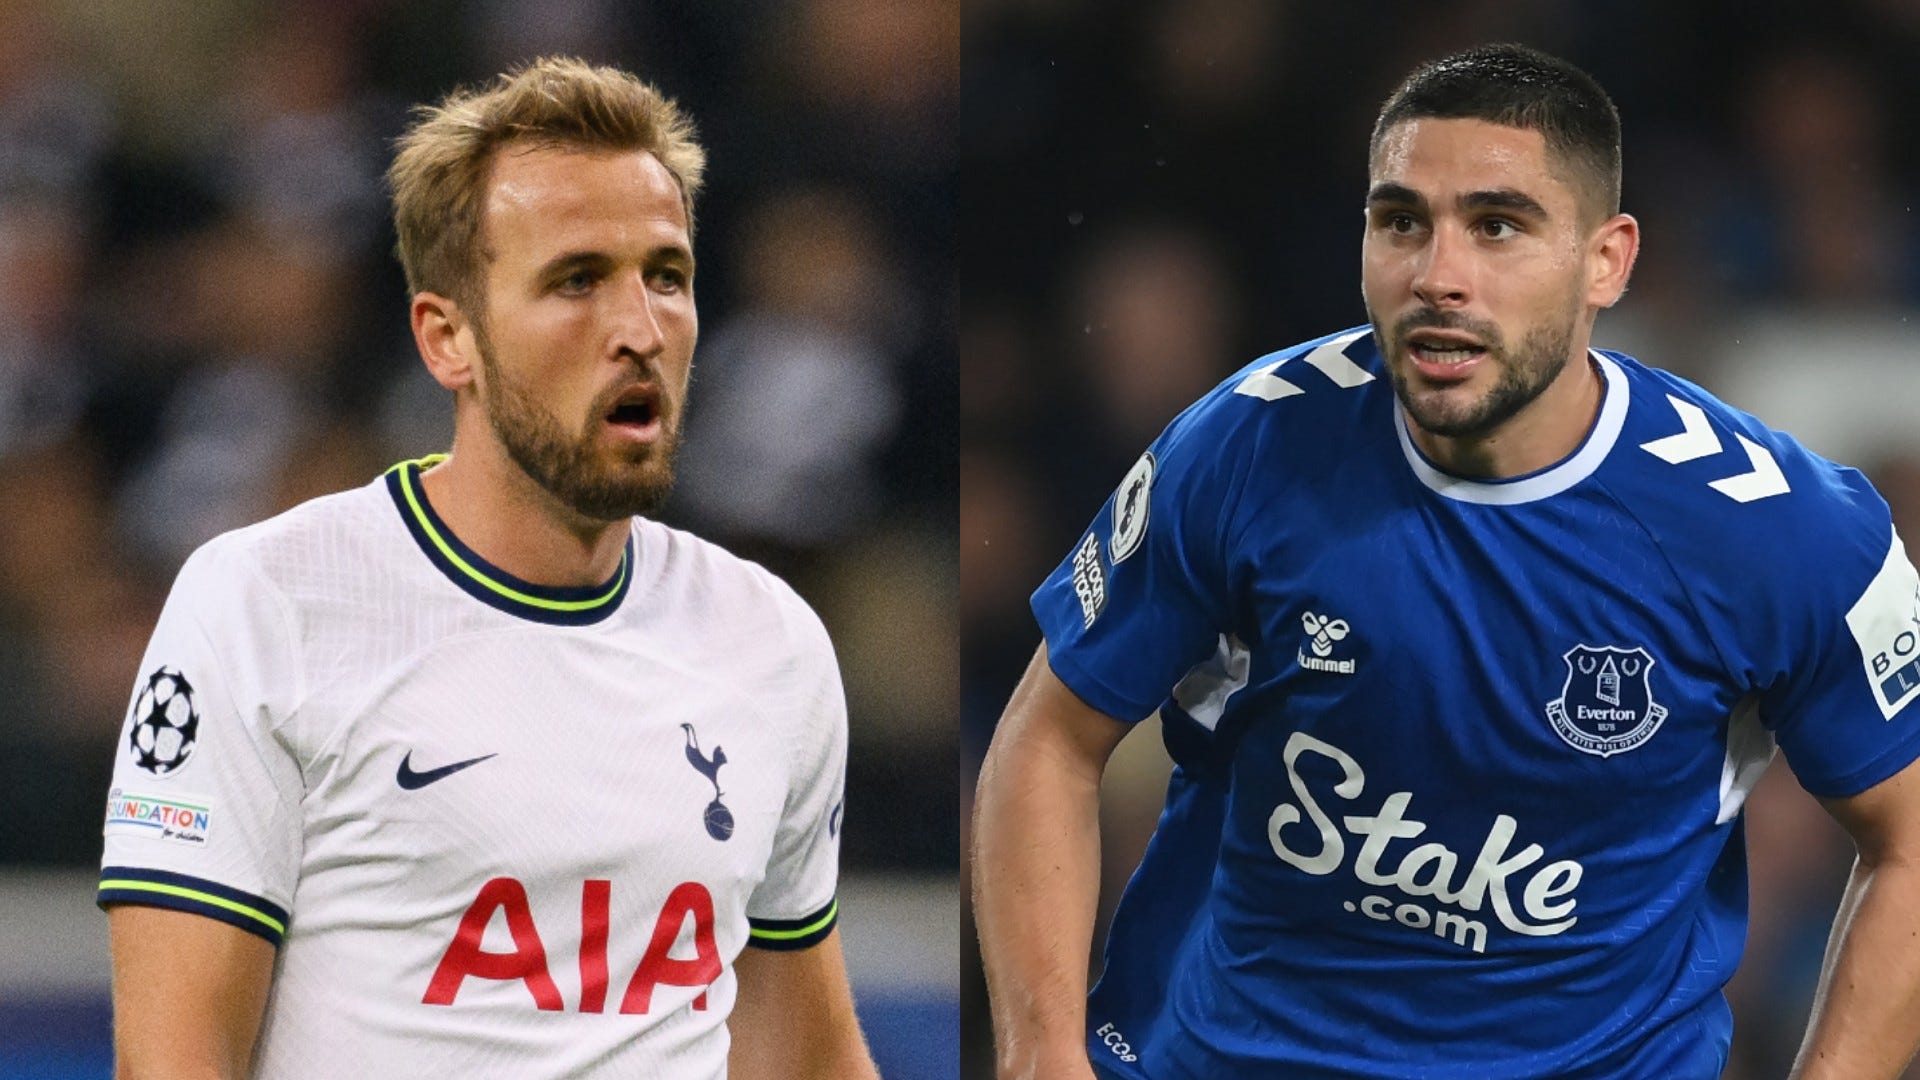 Tottenham vs Everton Live stream, TV channel, kick-off time and where to watch Goal US